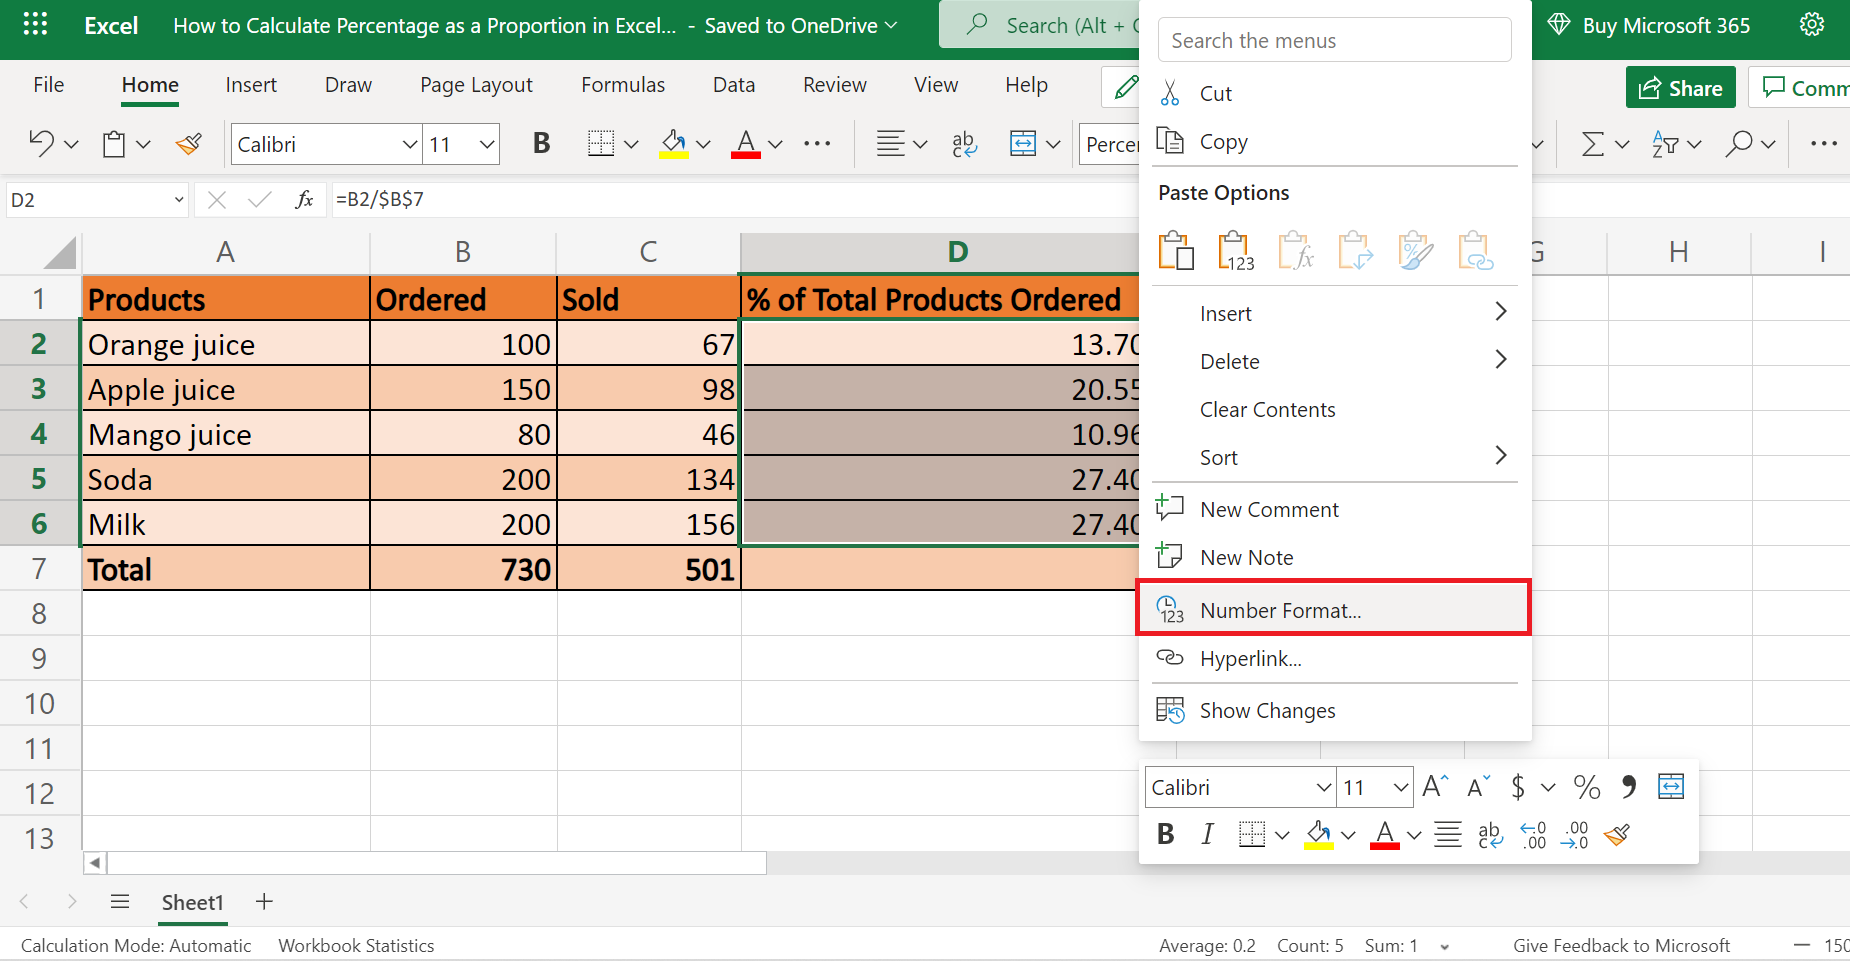 Percentage as Proportion in Excel